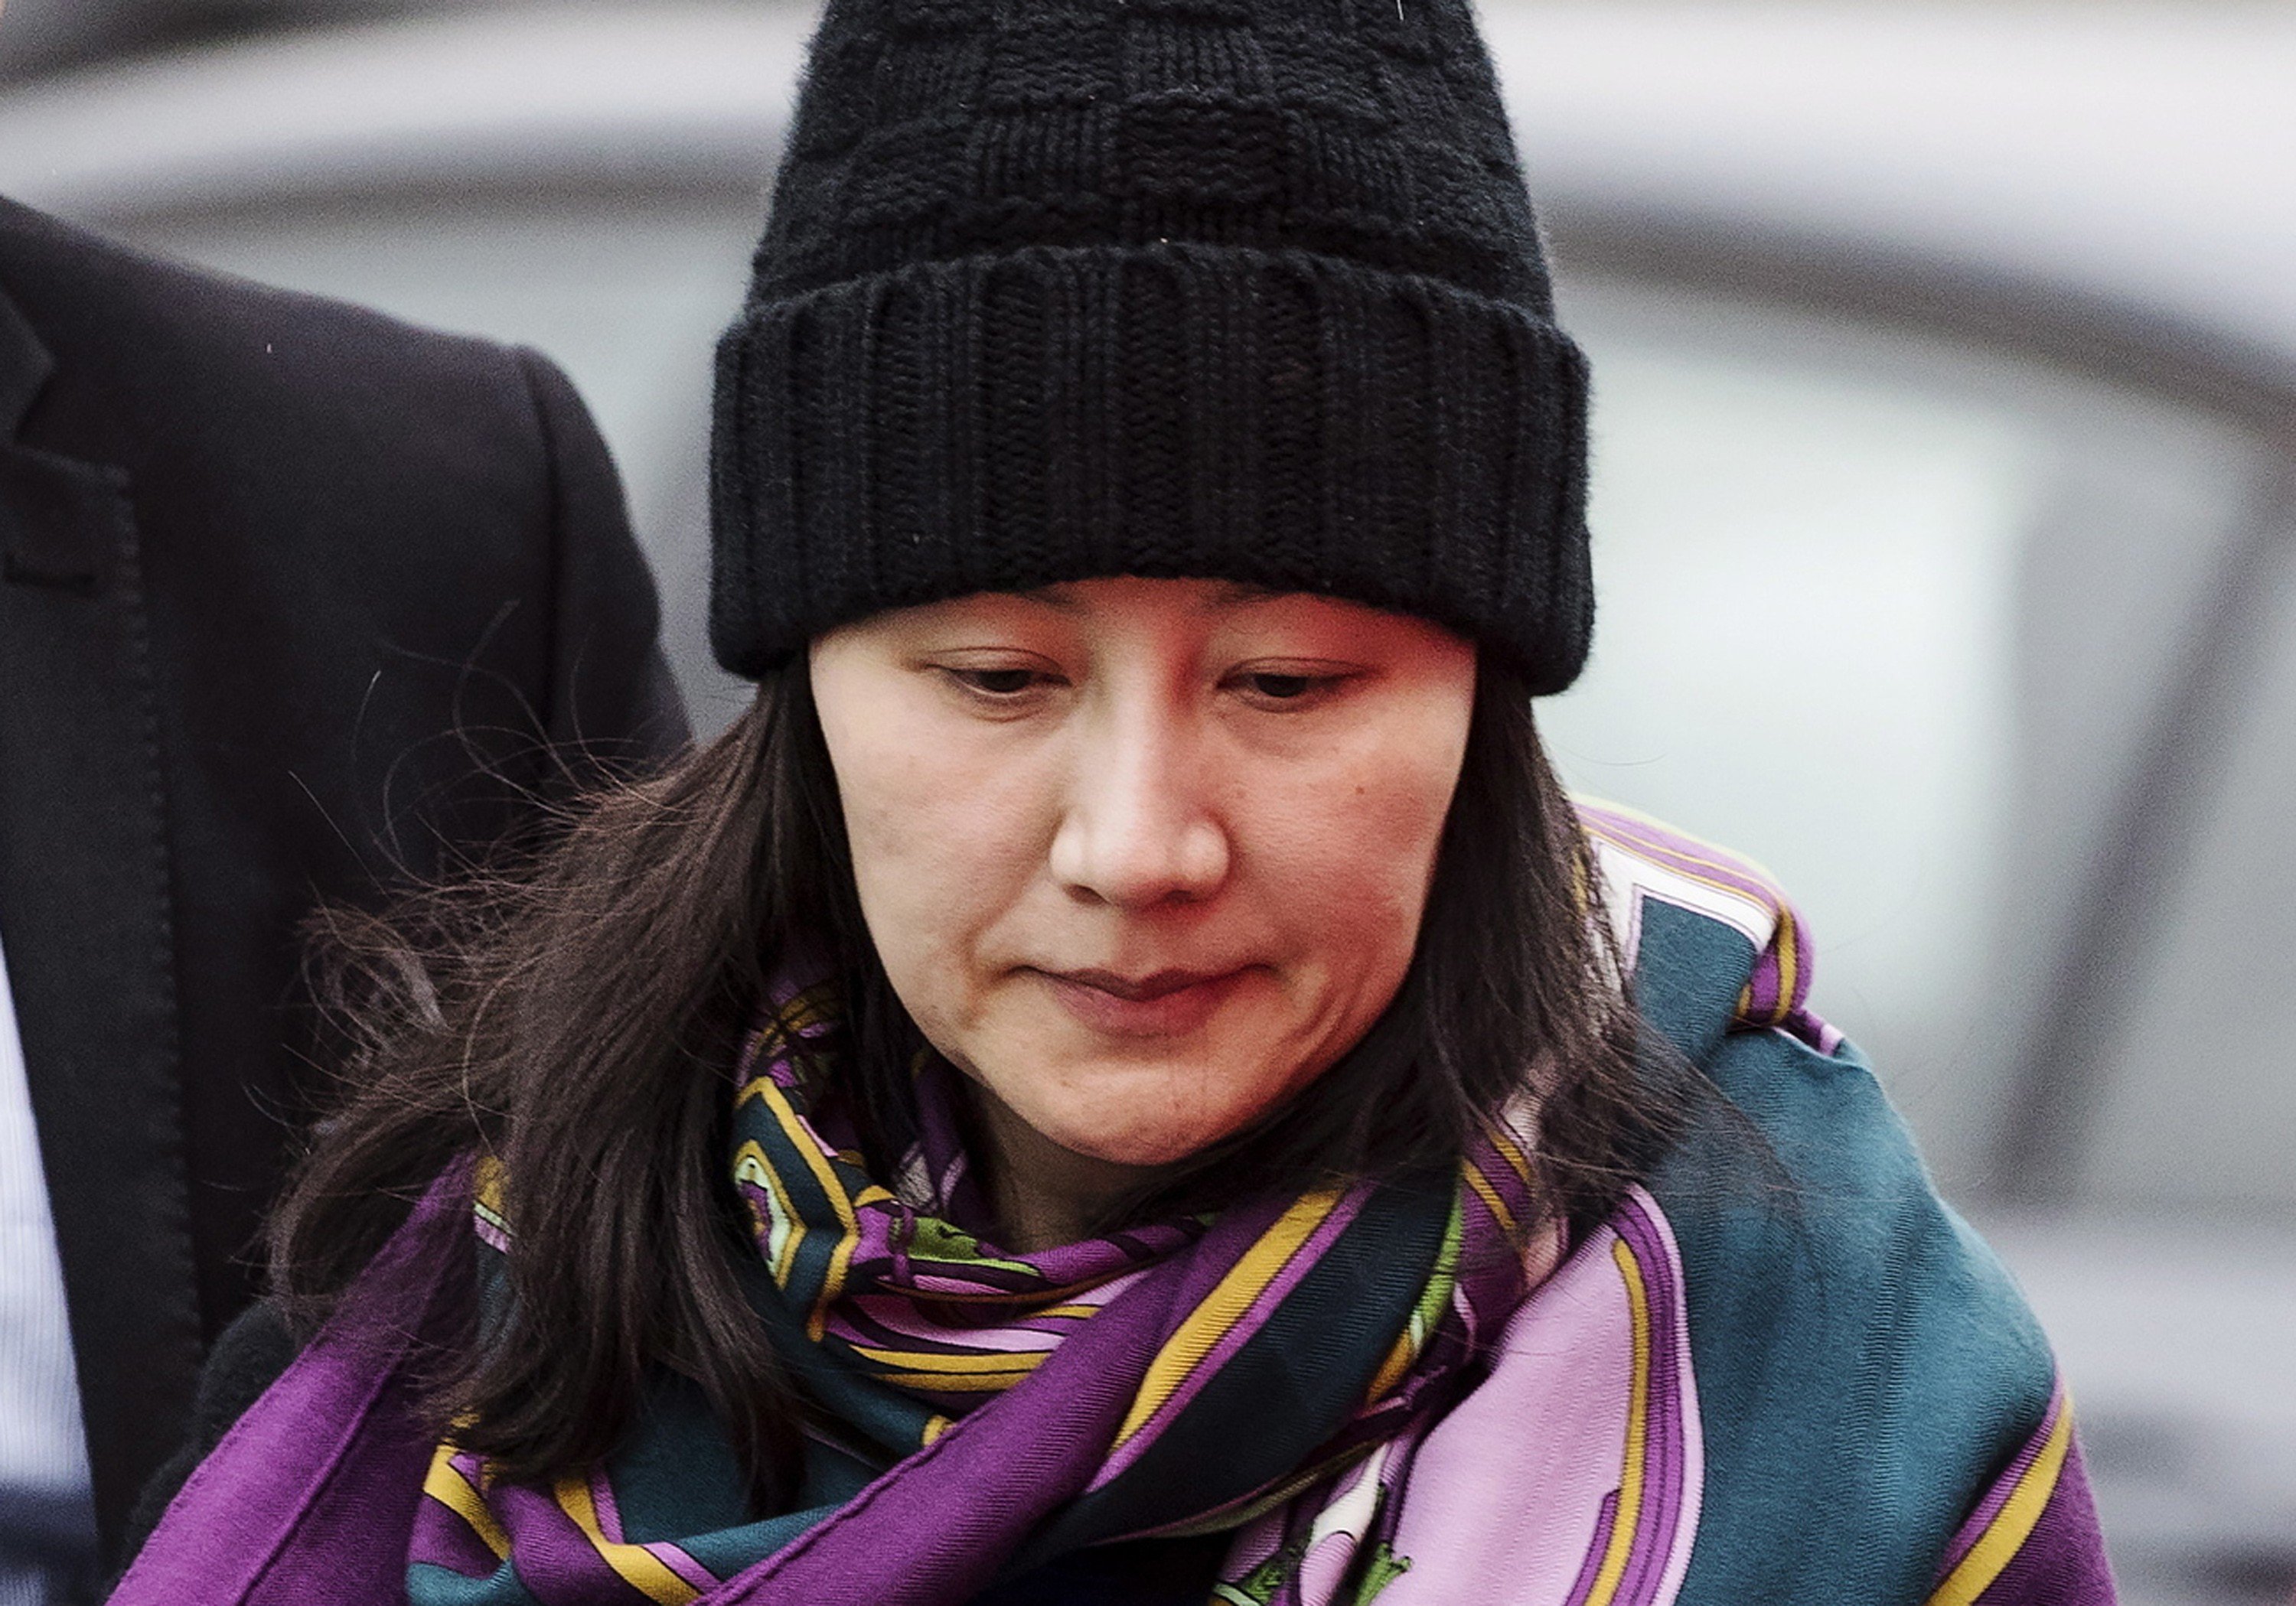 Huawei chief financial officer Meng Wanzhou, whose arrest has strained relations between Canada and China. Photo: AP